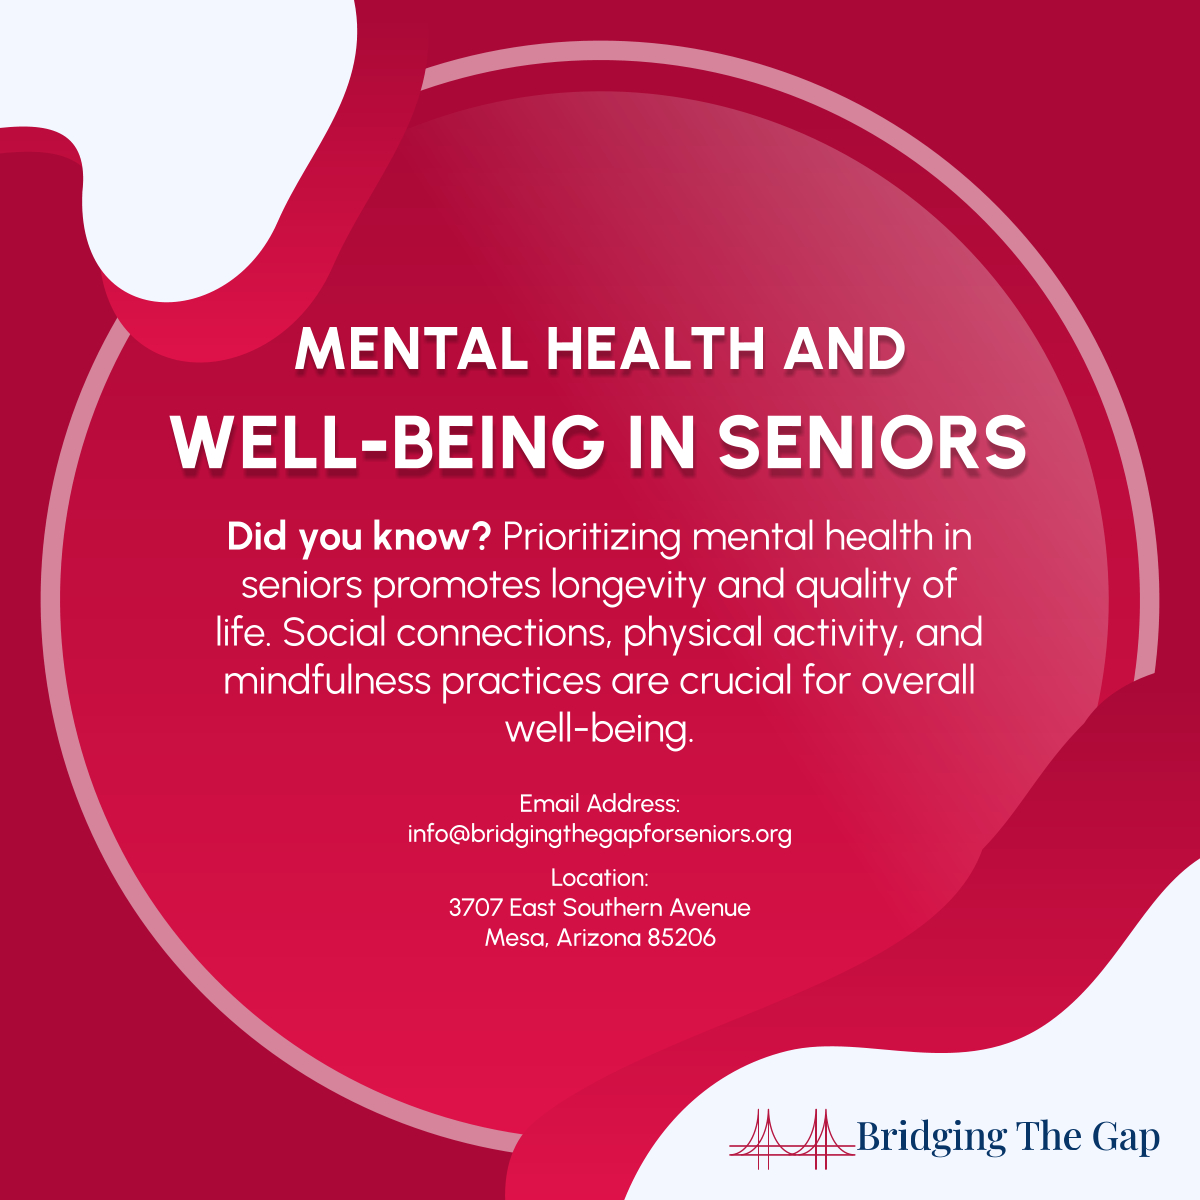 Unlock the secret to a fulfilling golden age! Discover how nurturing mental health boosts seniors' vitality and joy. Join the journey to wellness today. 

#SeniorWellness #MindfulAging #MesaAZ